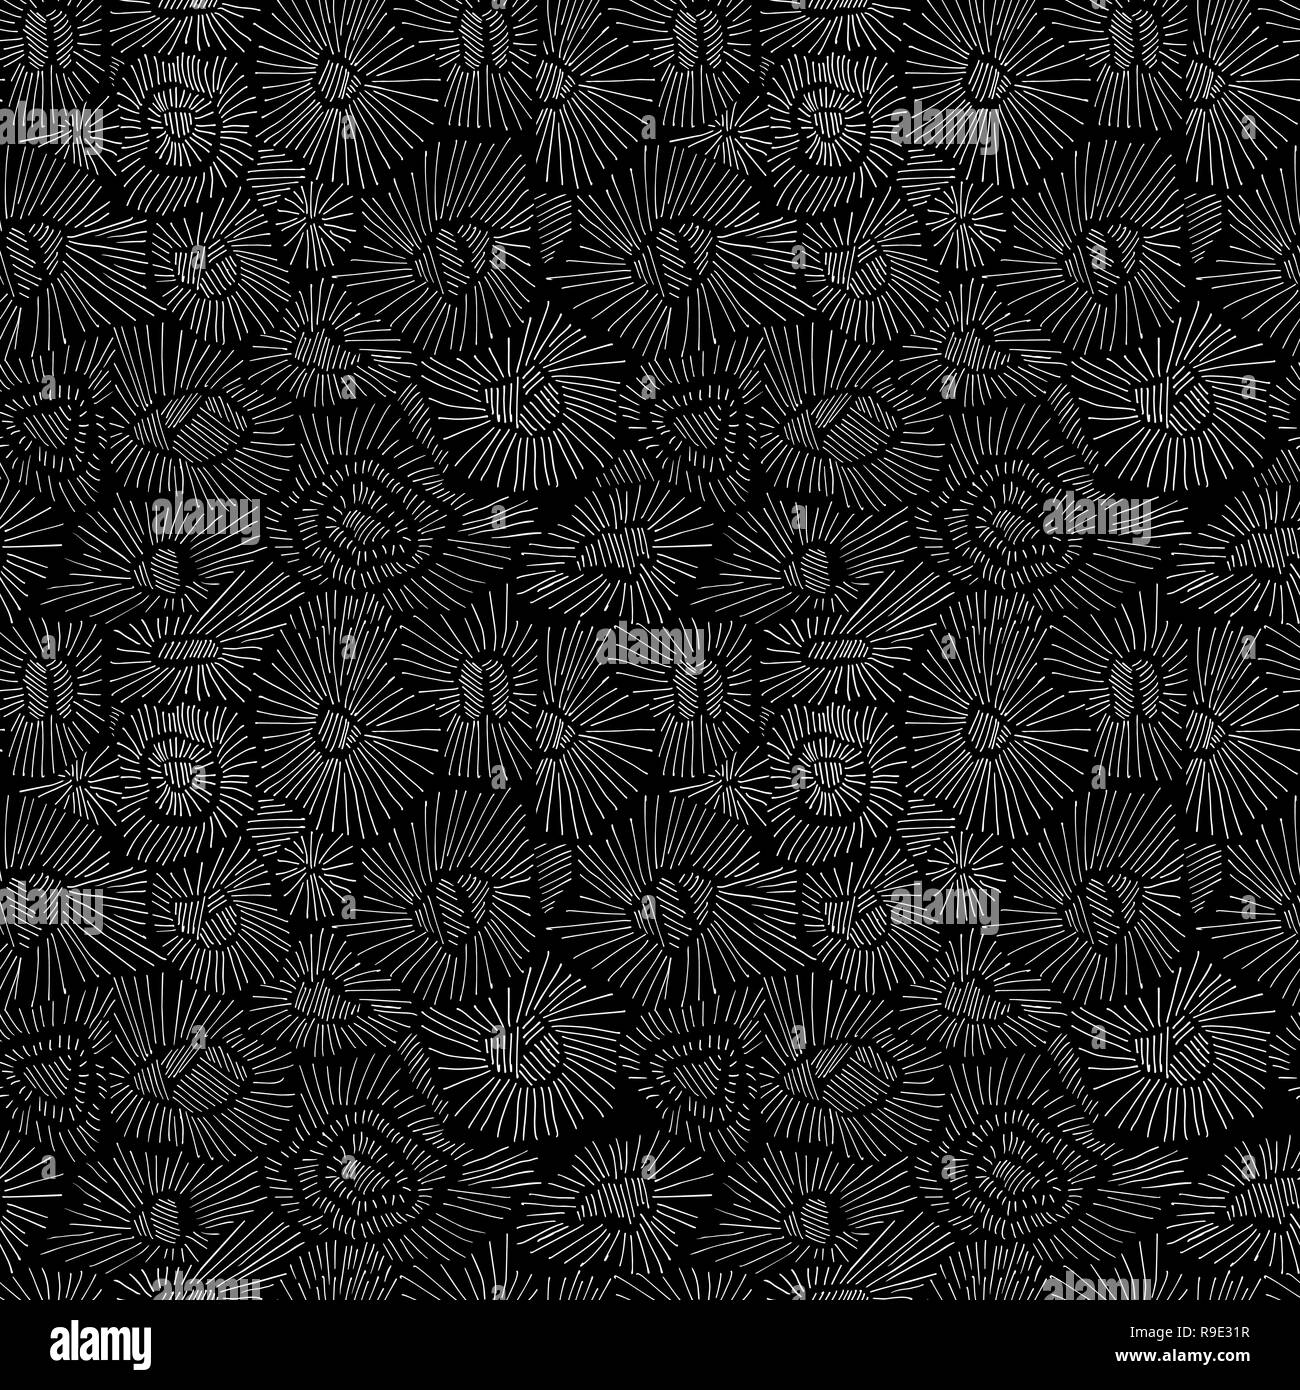 Abstract black seamless pattern. Dark hatching texture. Radiating hand drawn lines, stitches, sunburst, chaotic scratches pattern. Bright irregular engraving lines. Textile, wallpaper, background fill Stock Vector